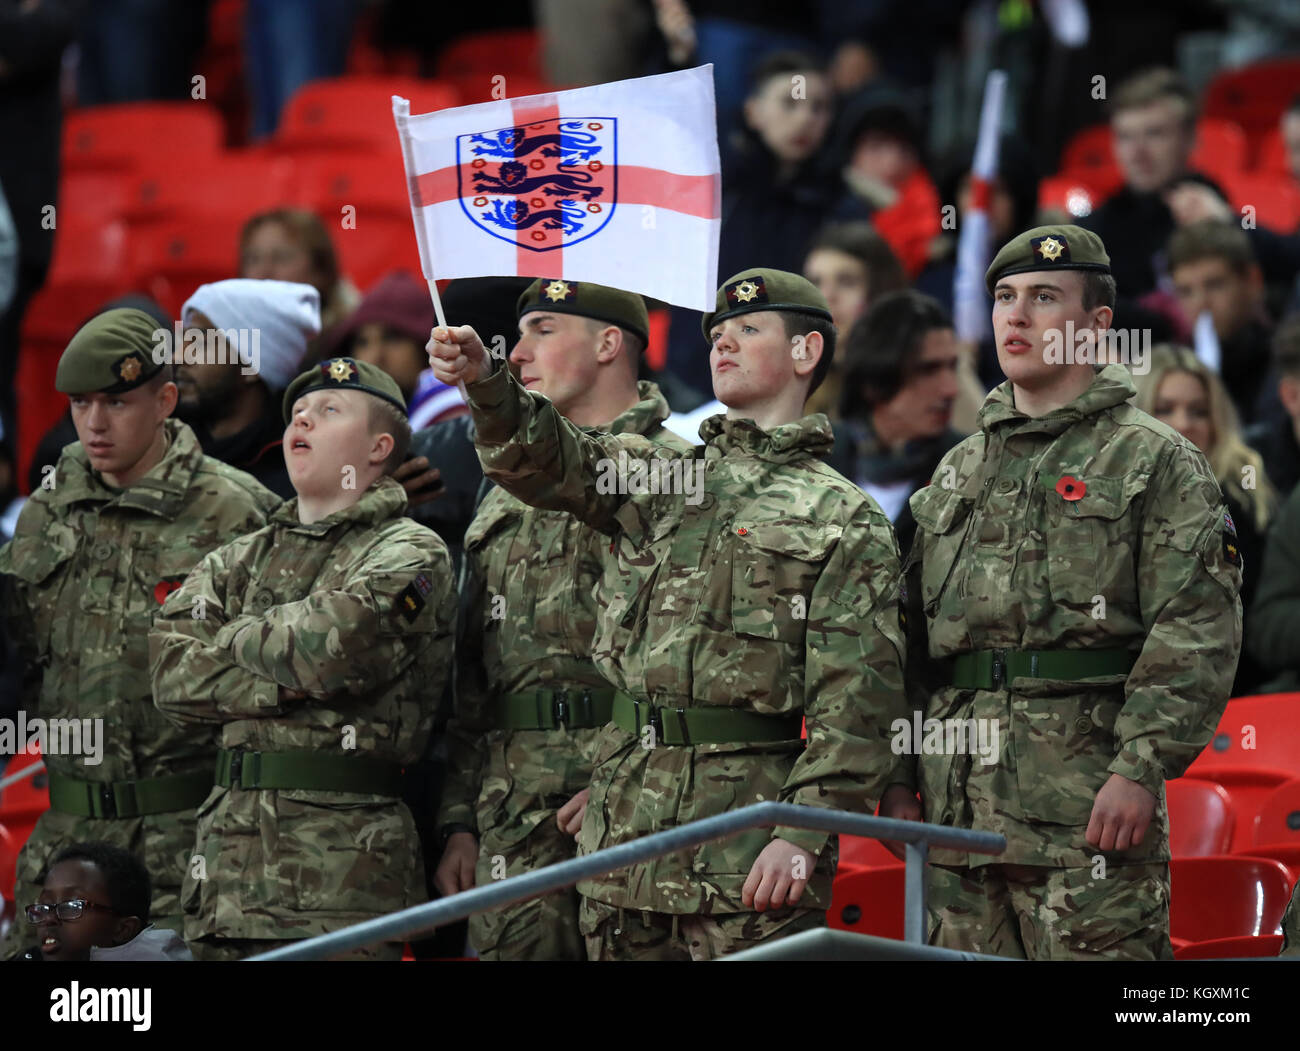 A member of the armed forces waves a three lions St Georges flag during the International Friendly match at Wembley Stadium, London. Stock Photo